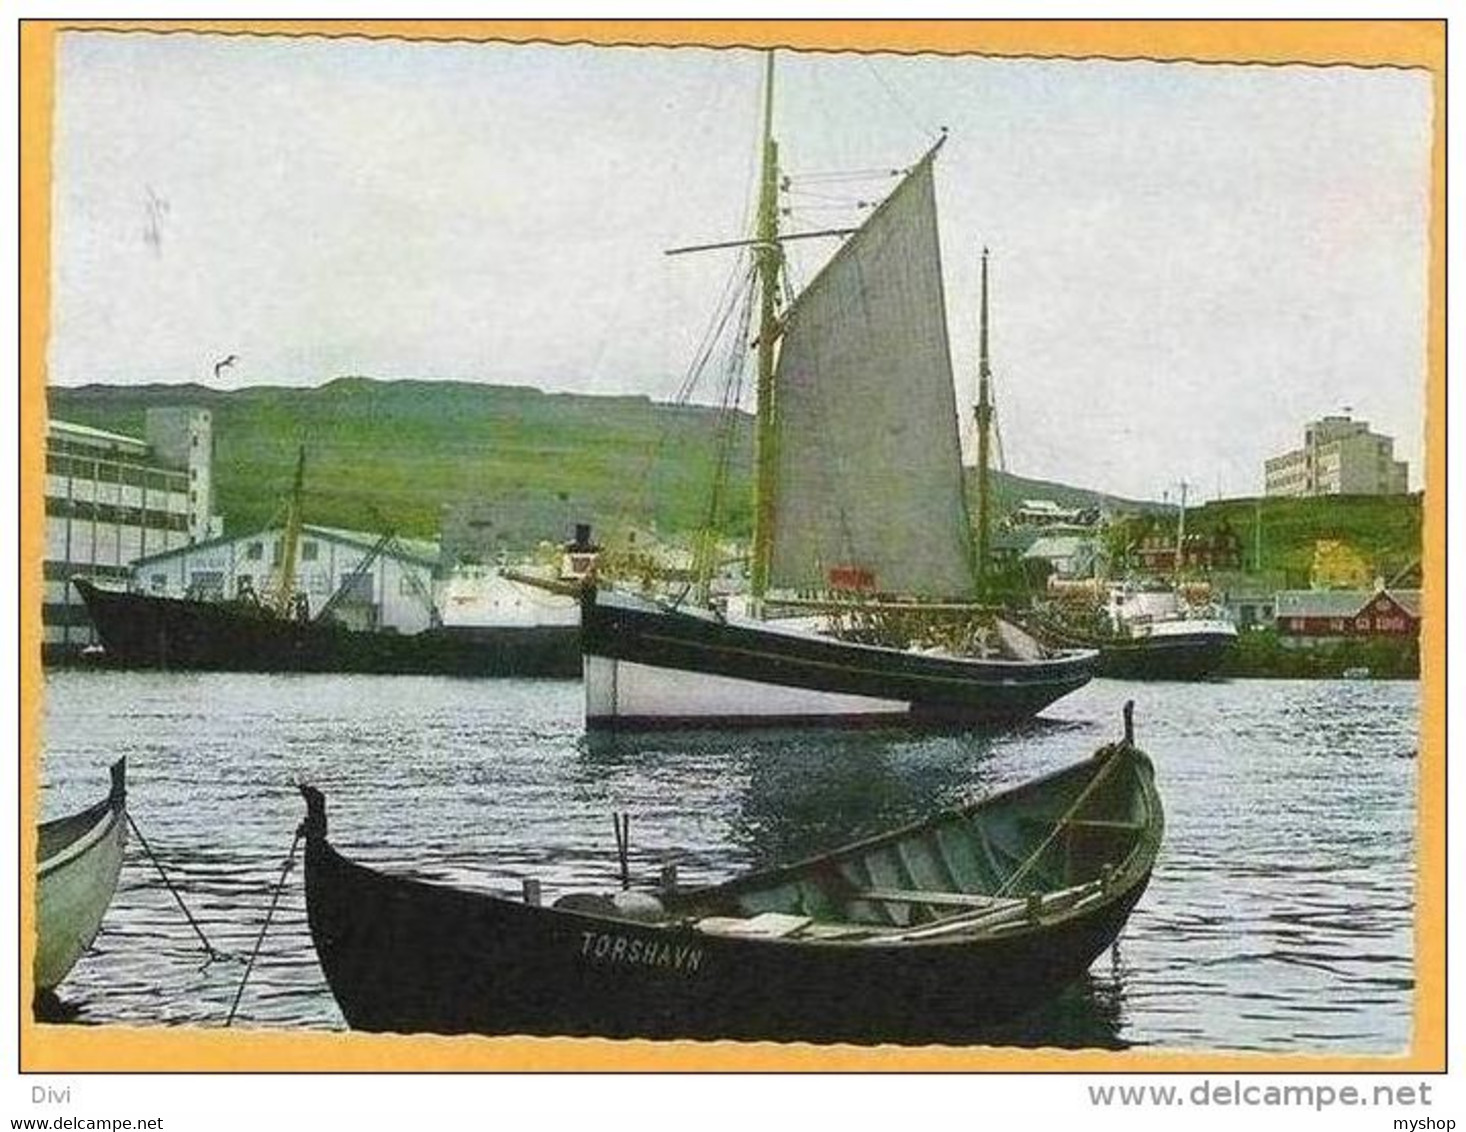 FAROE ISLANDS 002, * OLD And NEW IN THE HARBOUR OF TORSHAVN * SENT With STAMP * SEE SCANS - Färöer